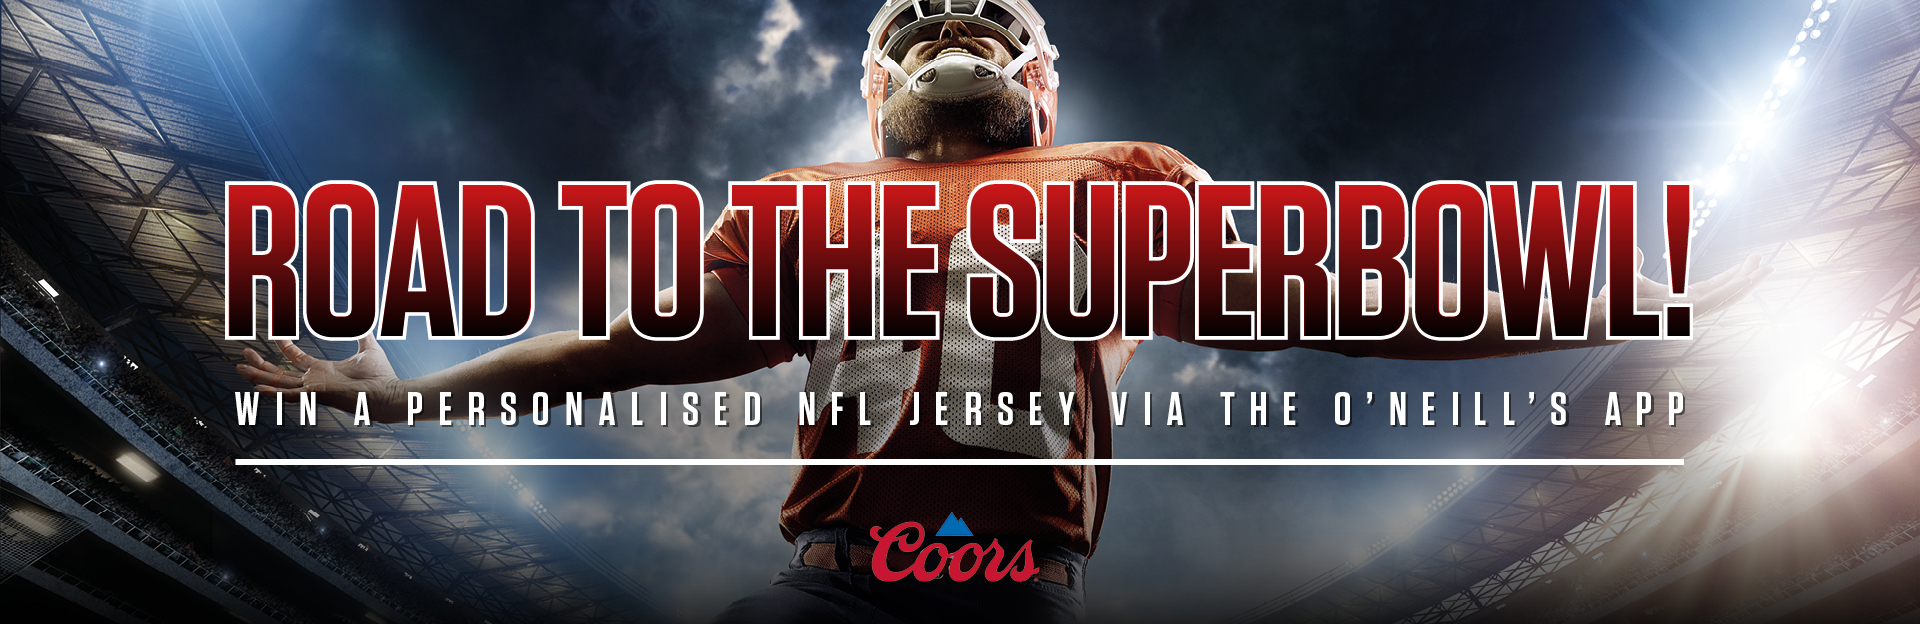 Watch NFL at The Beverley